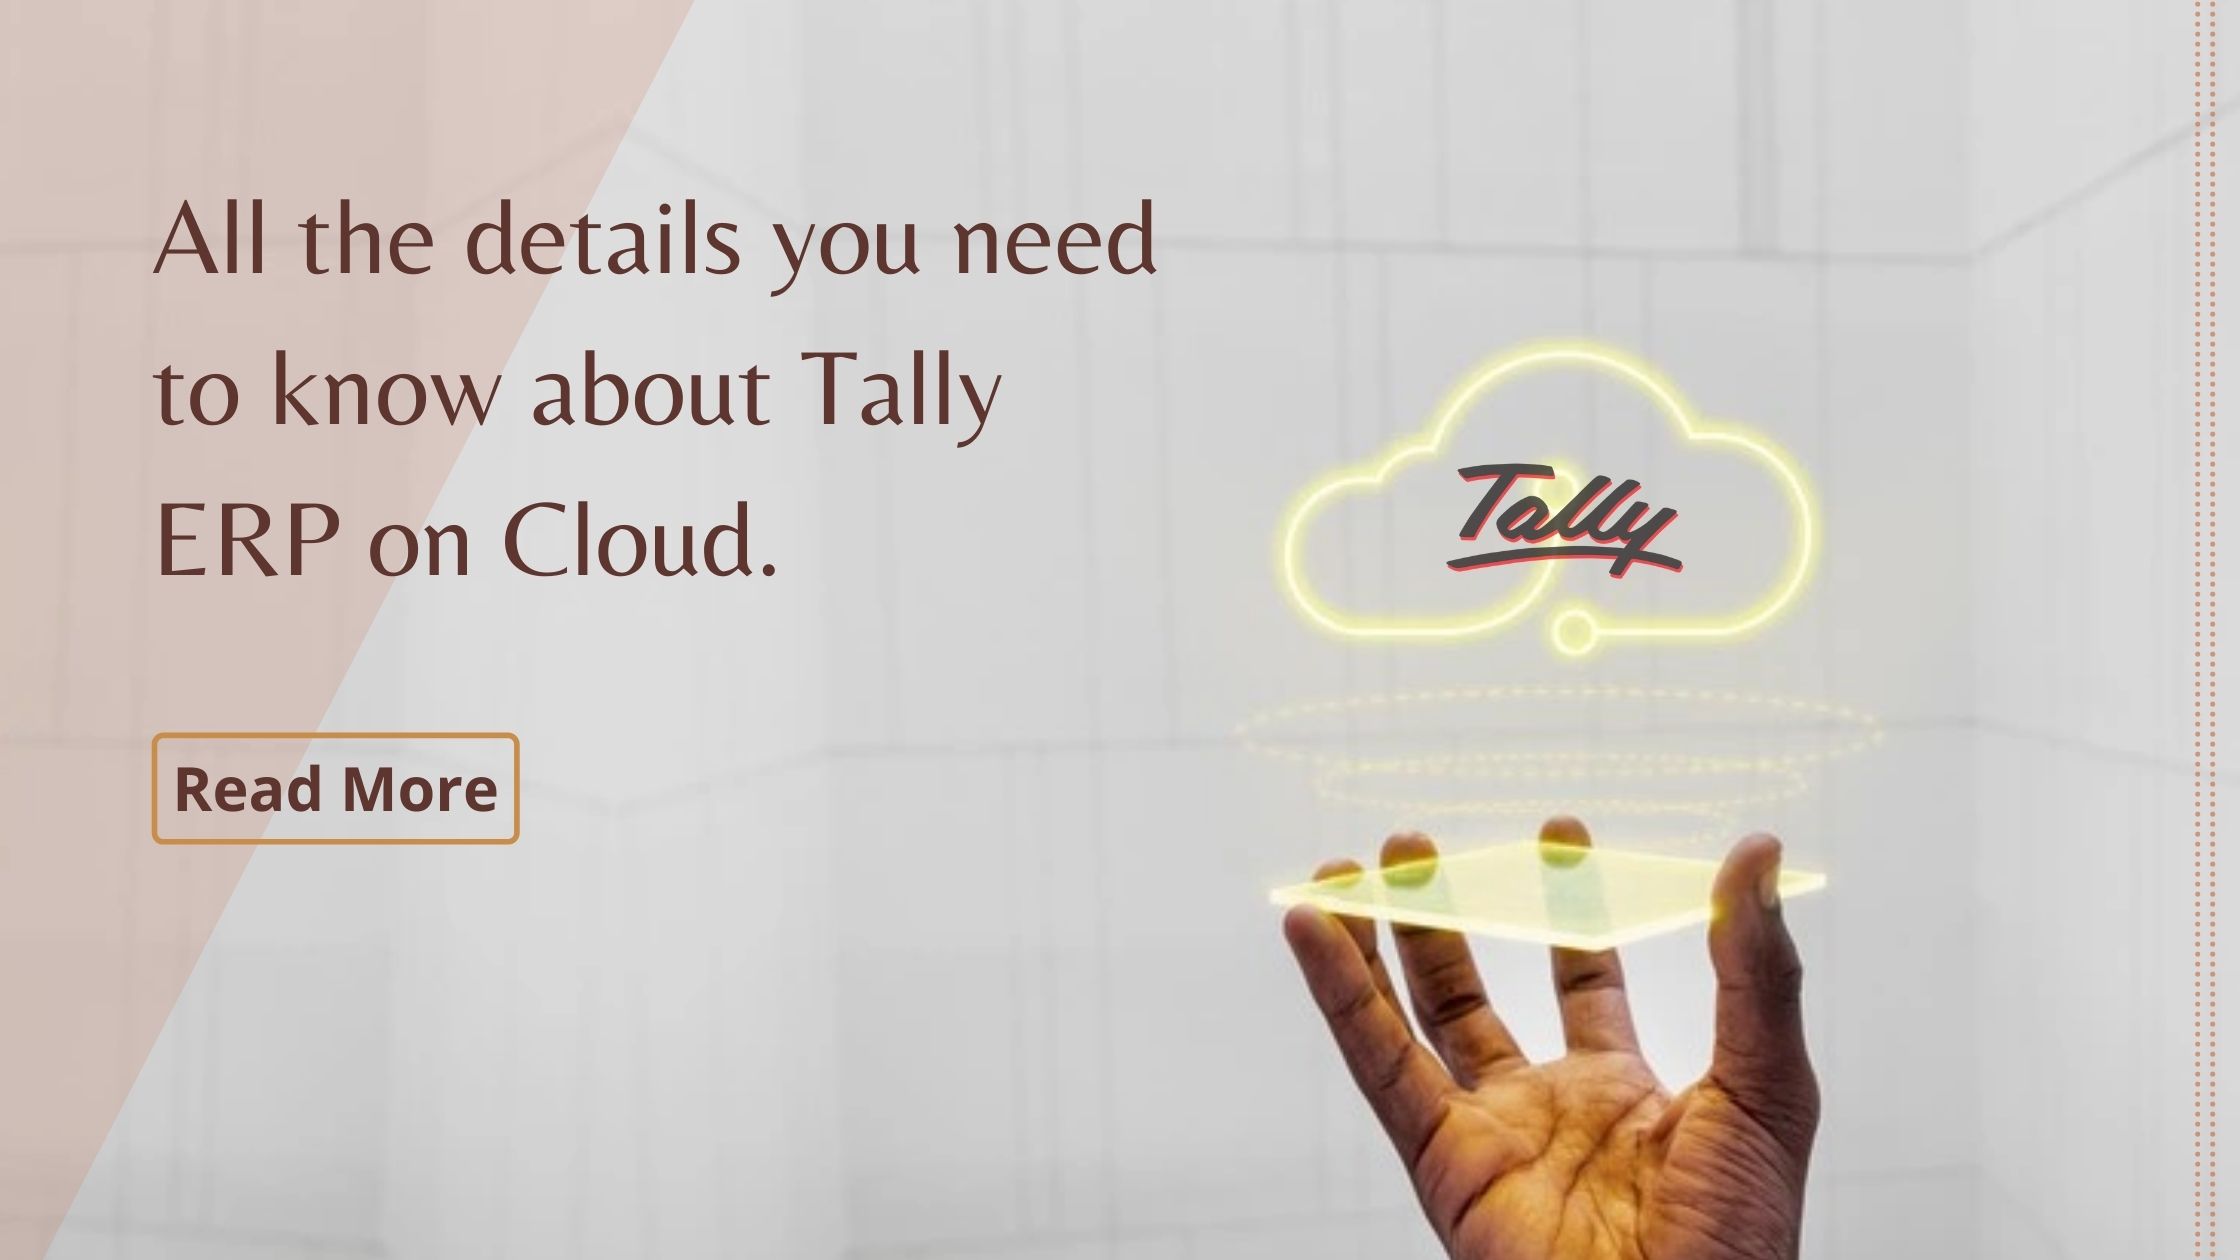 Tally erp on cloud details